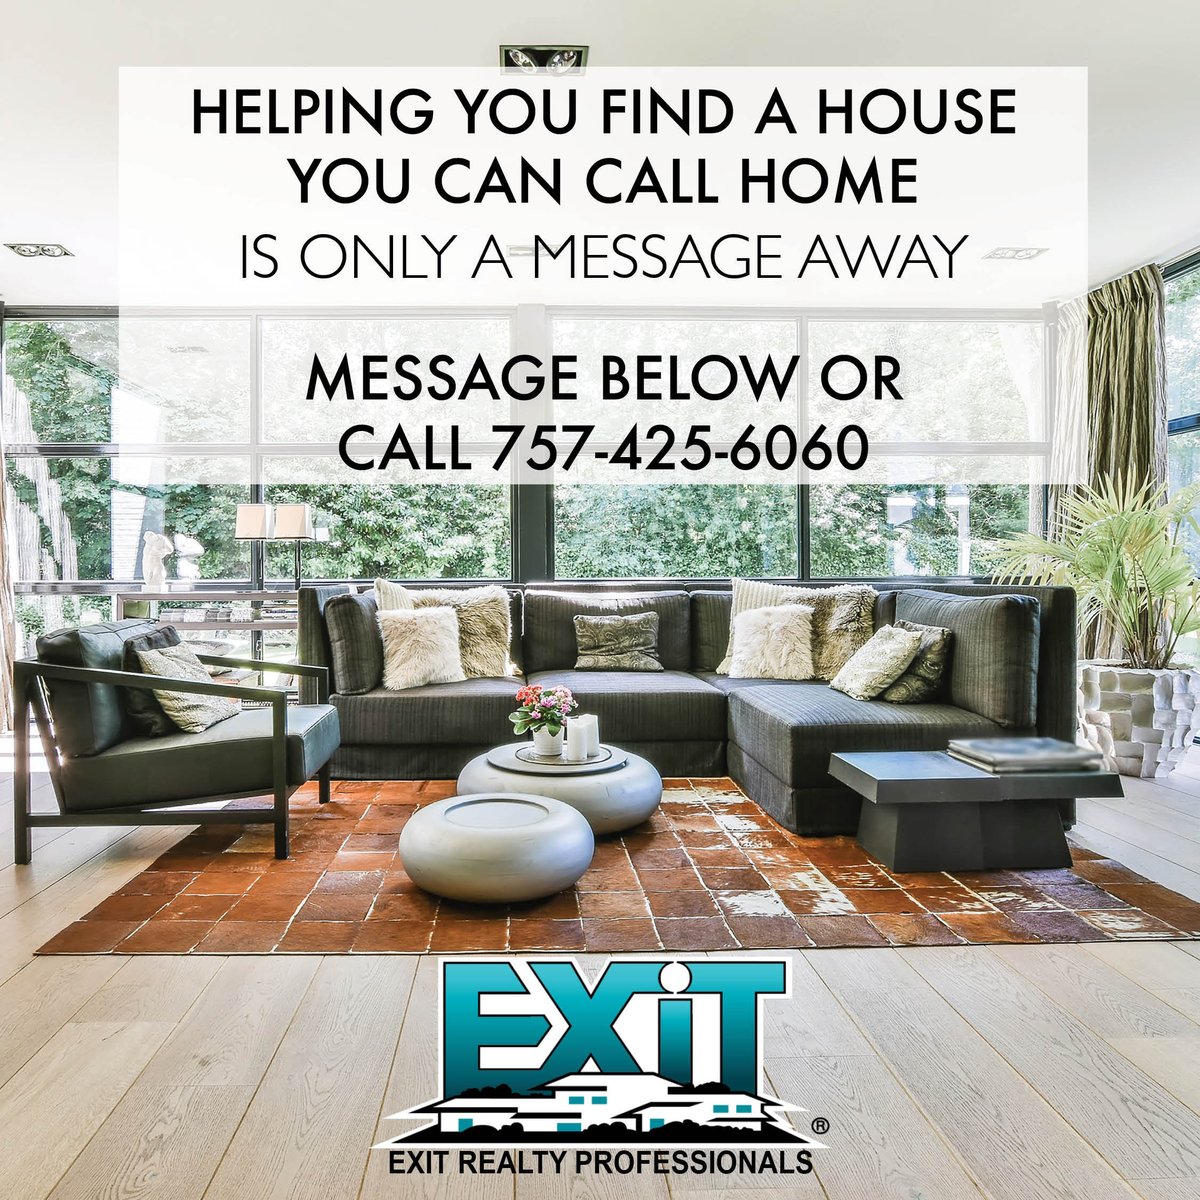 Helping you find a house you can call home!
#VirginiaBeachRealEstate #EXITrealty #coastalhome #RealEstate #VirginiaBeach #homesforsale #hamptonroads #propertysolutions #propertymanagement #EXITrealtyprofessionals #RealEstateLife #RealtorLife #virginarealestate #virginia...